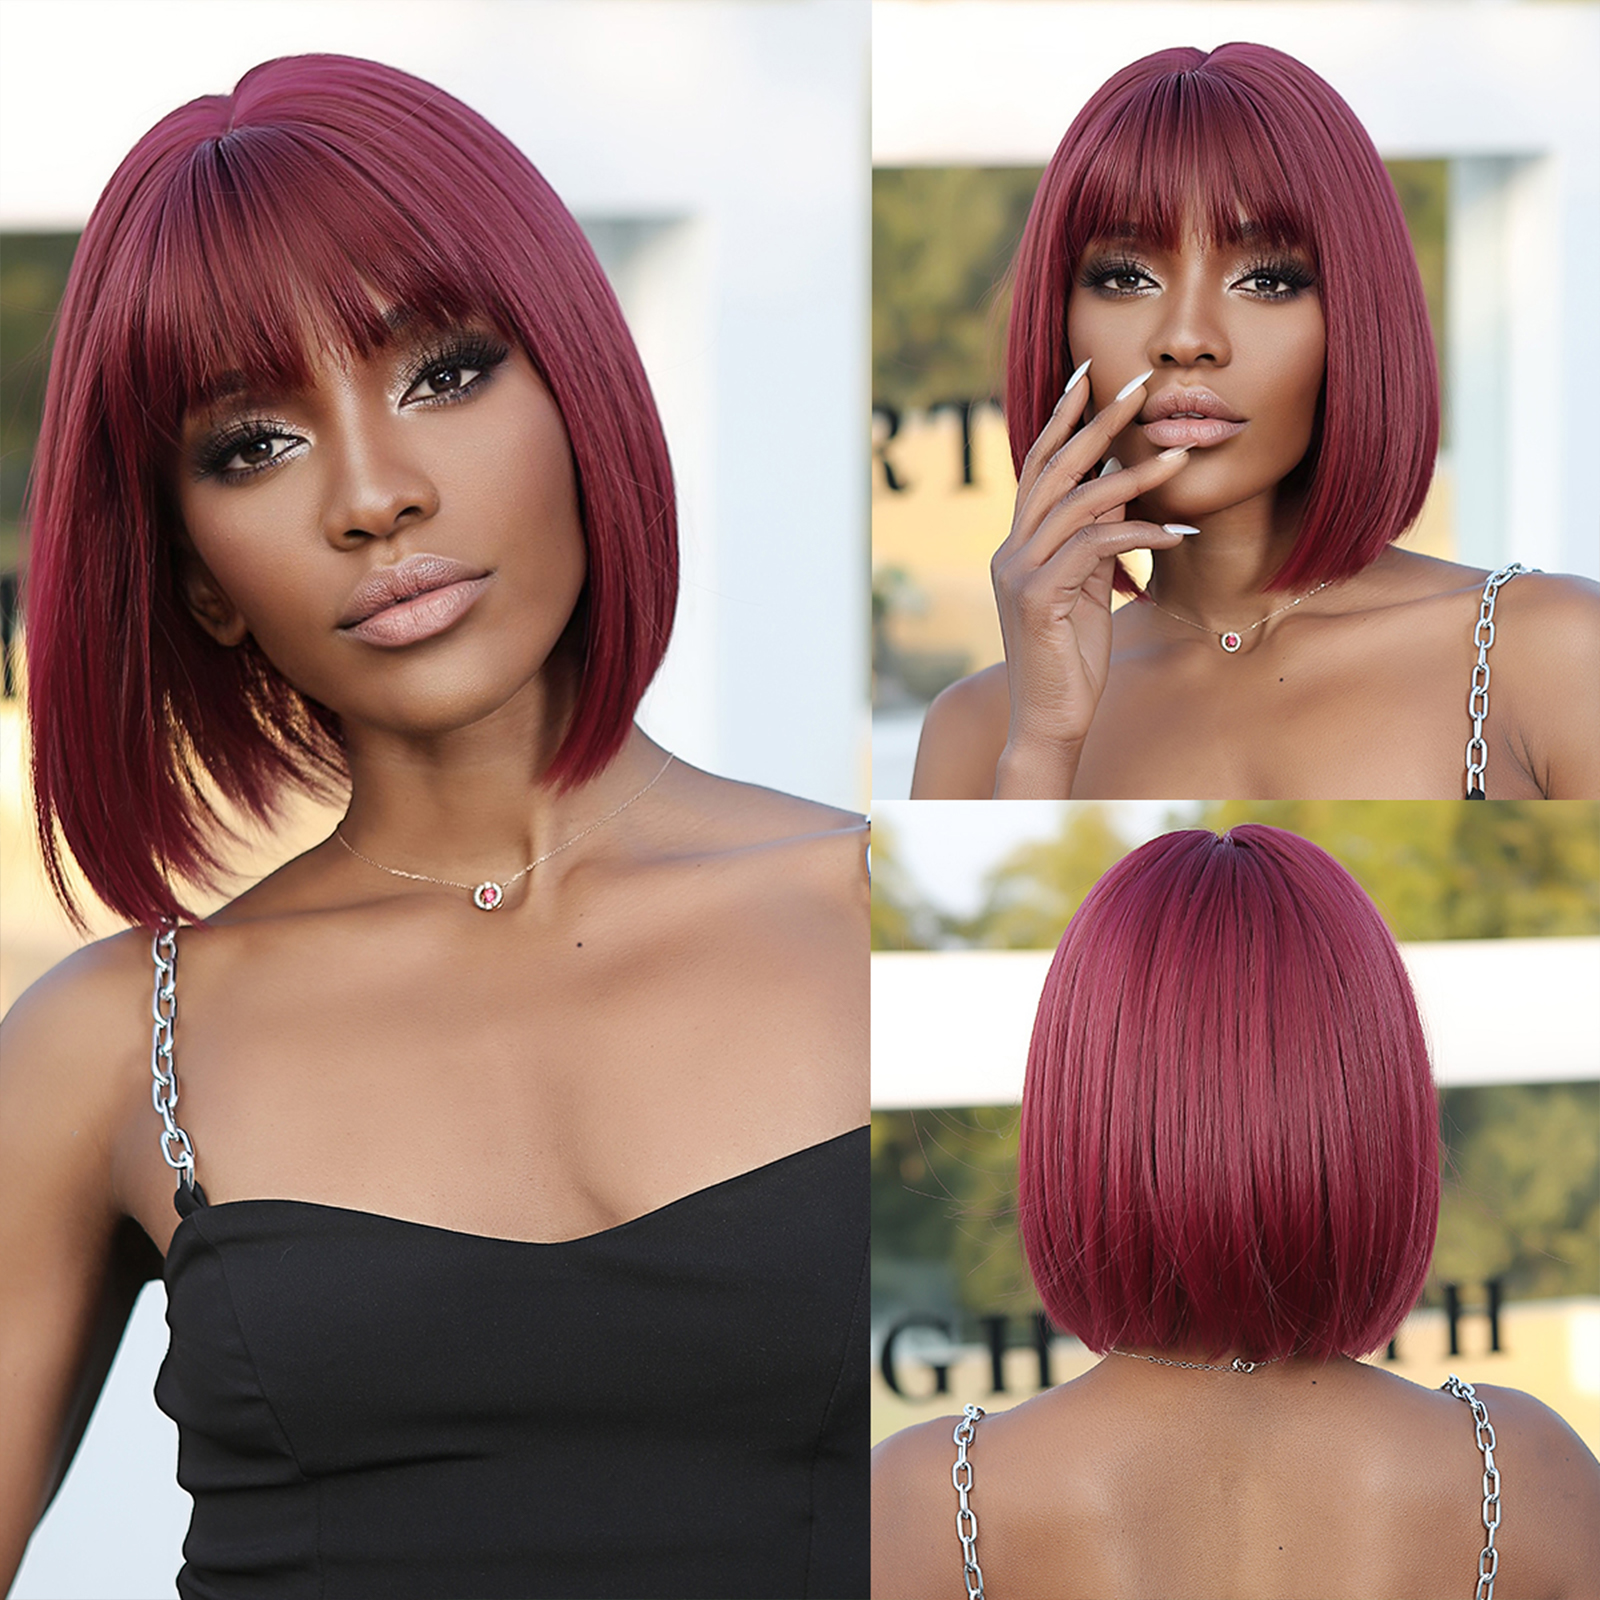 Short Bob Wigs Wine Red Straight Wigs Hair for Women Party Cosplay Heat Resistant Wig With Dark Roots